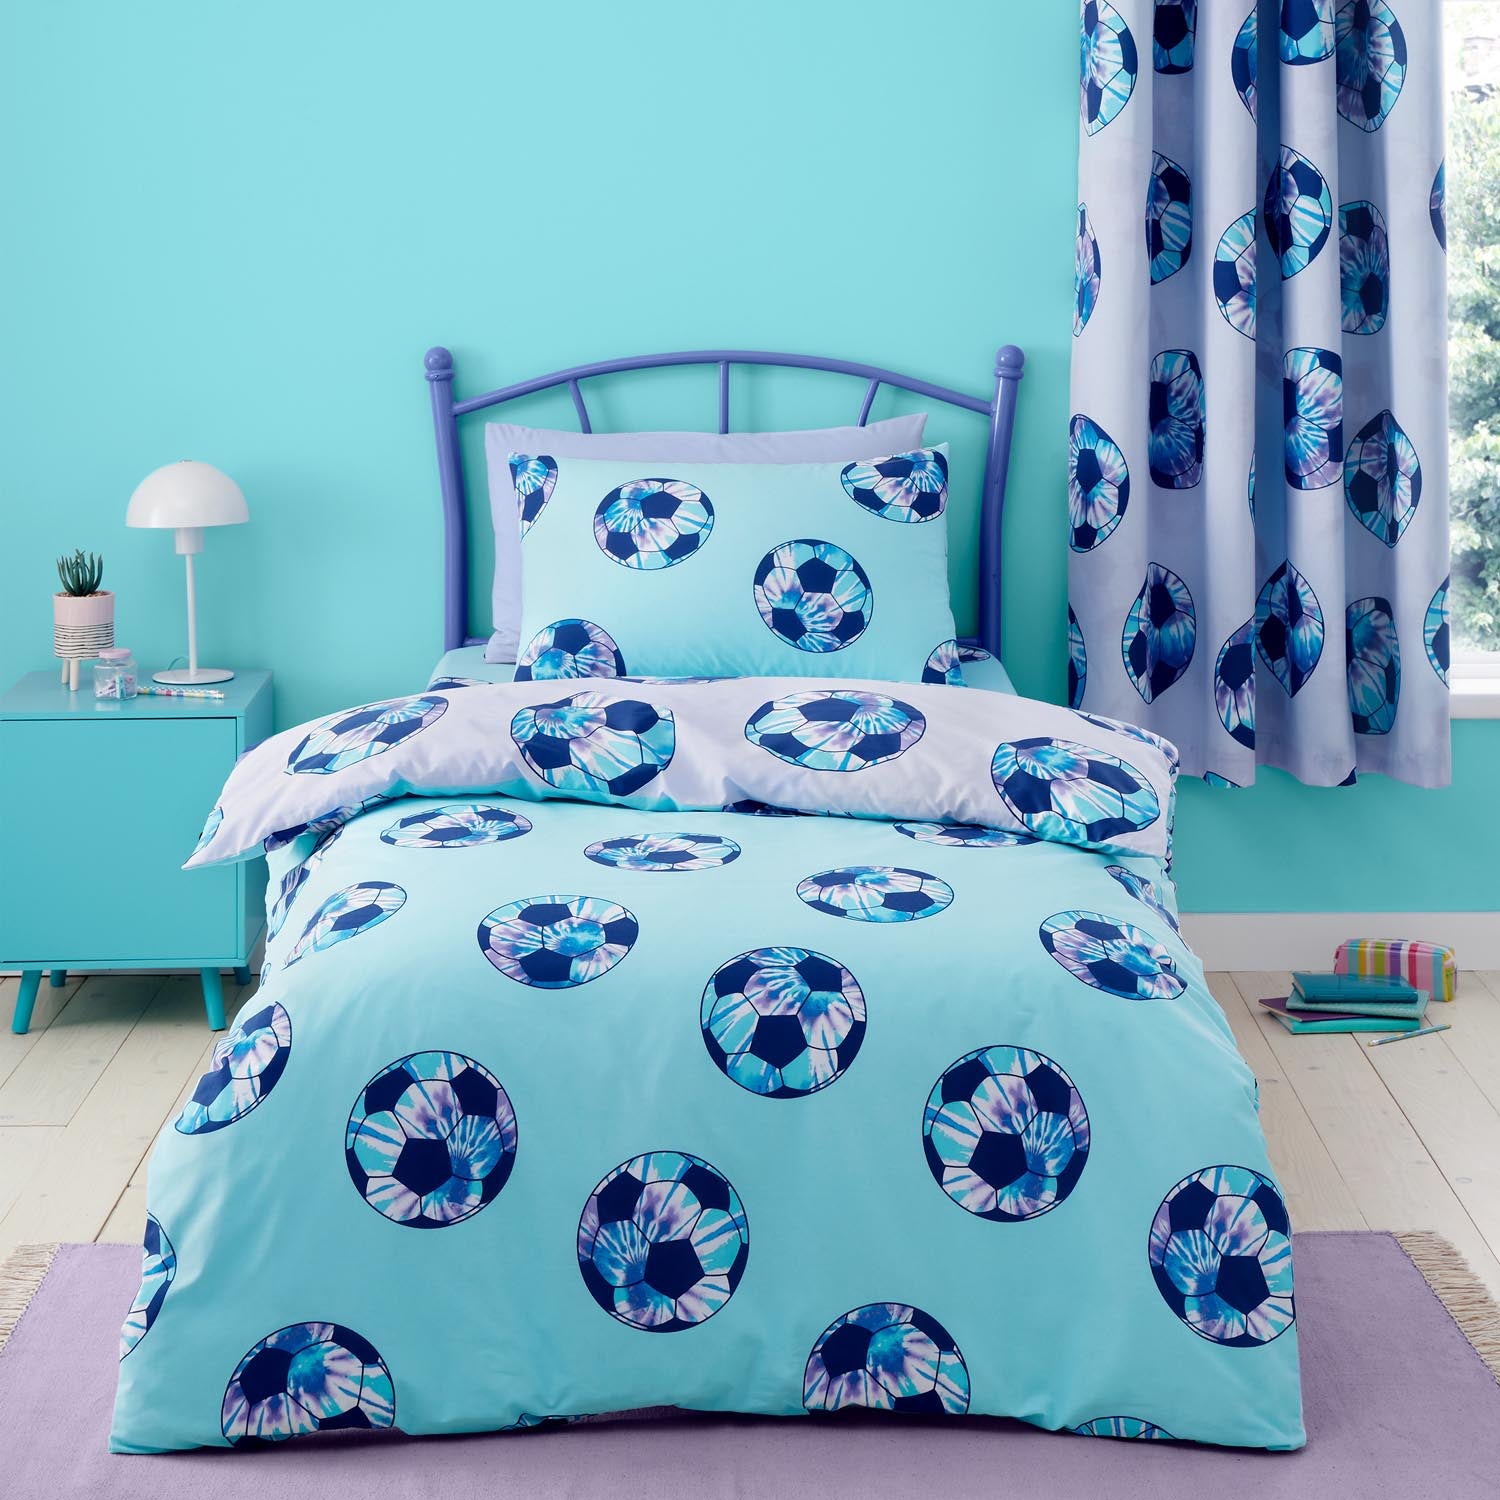 The Home Luxury Collection Tie Dye Football Duvet Cover Set 1 Shaws Department Stores